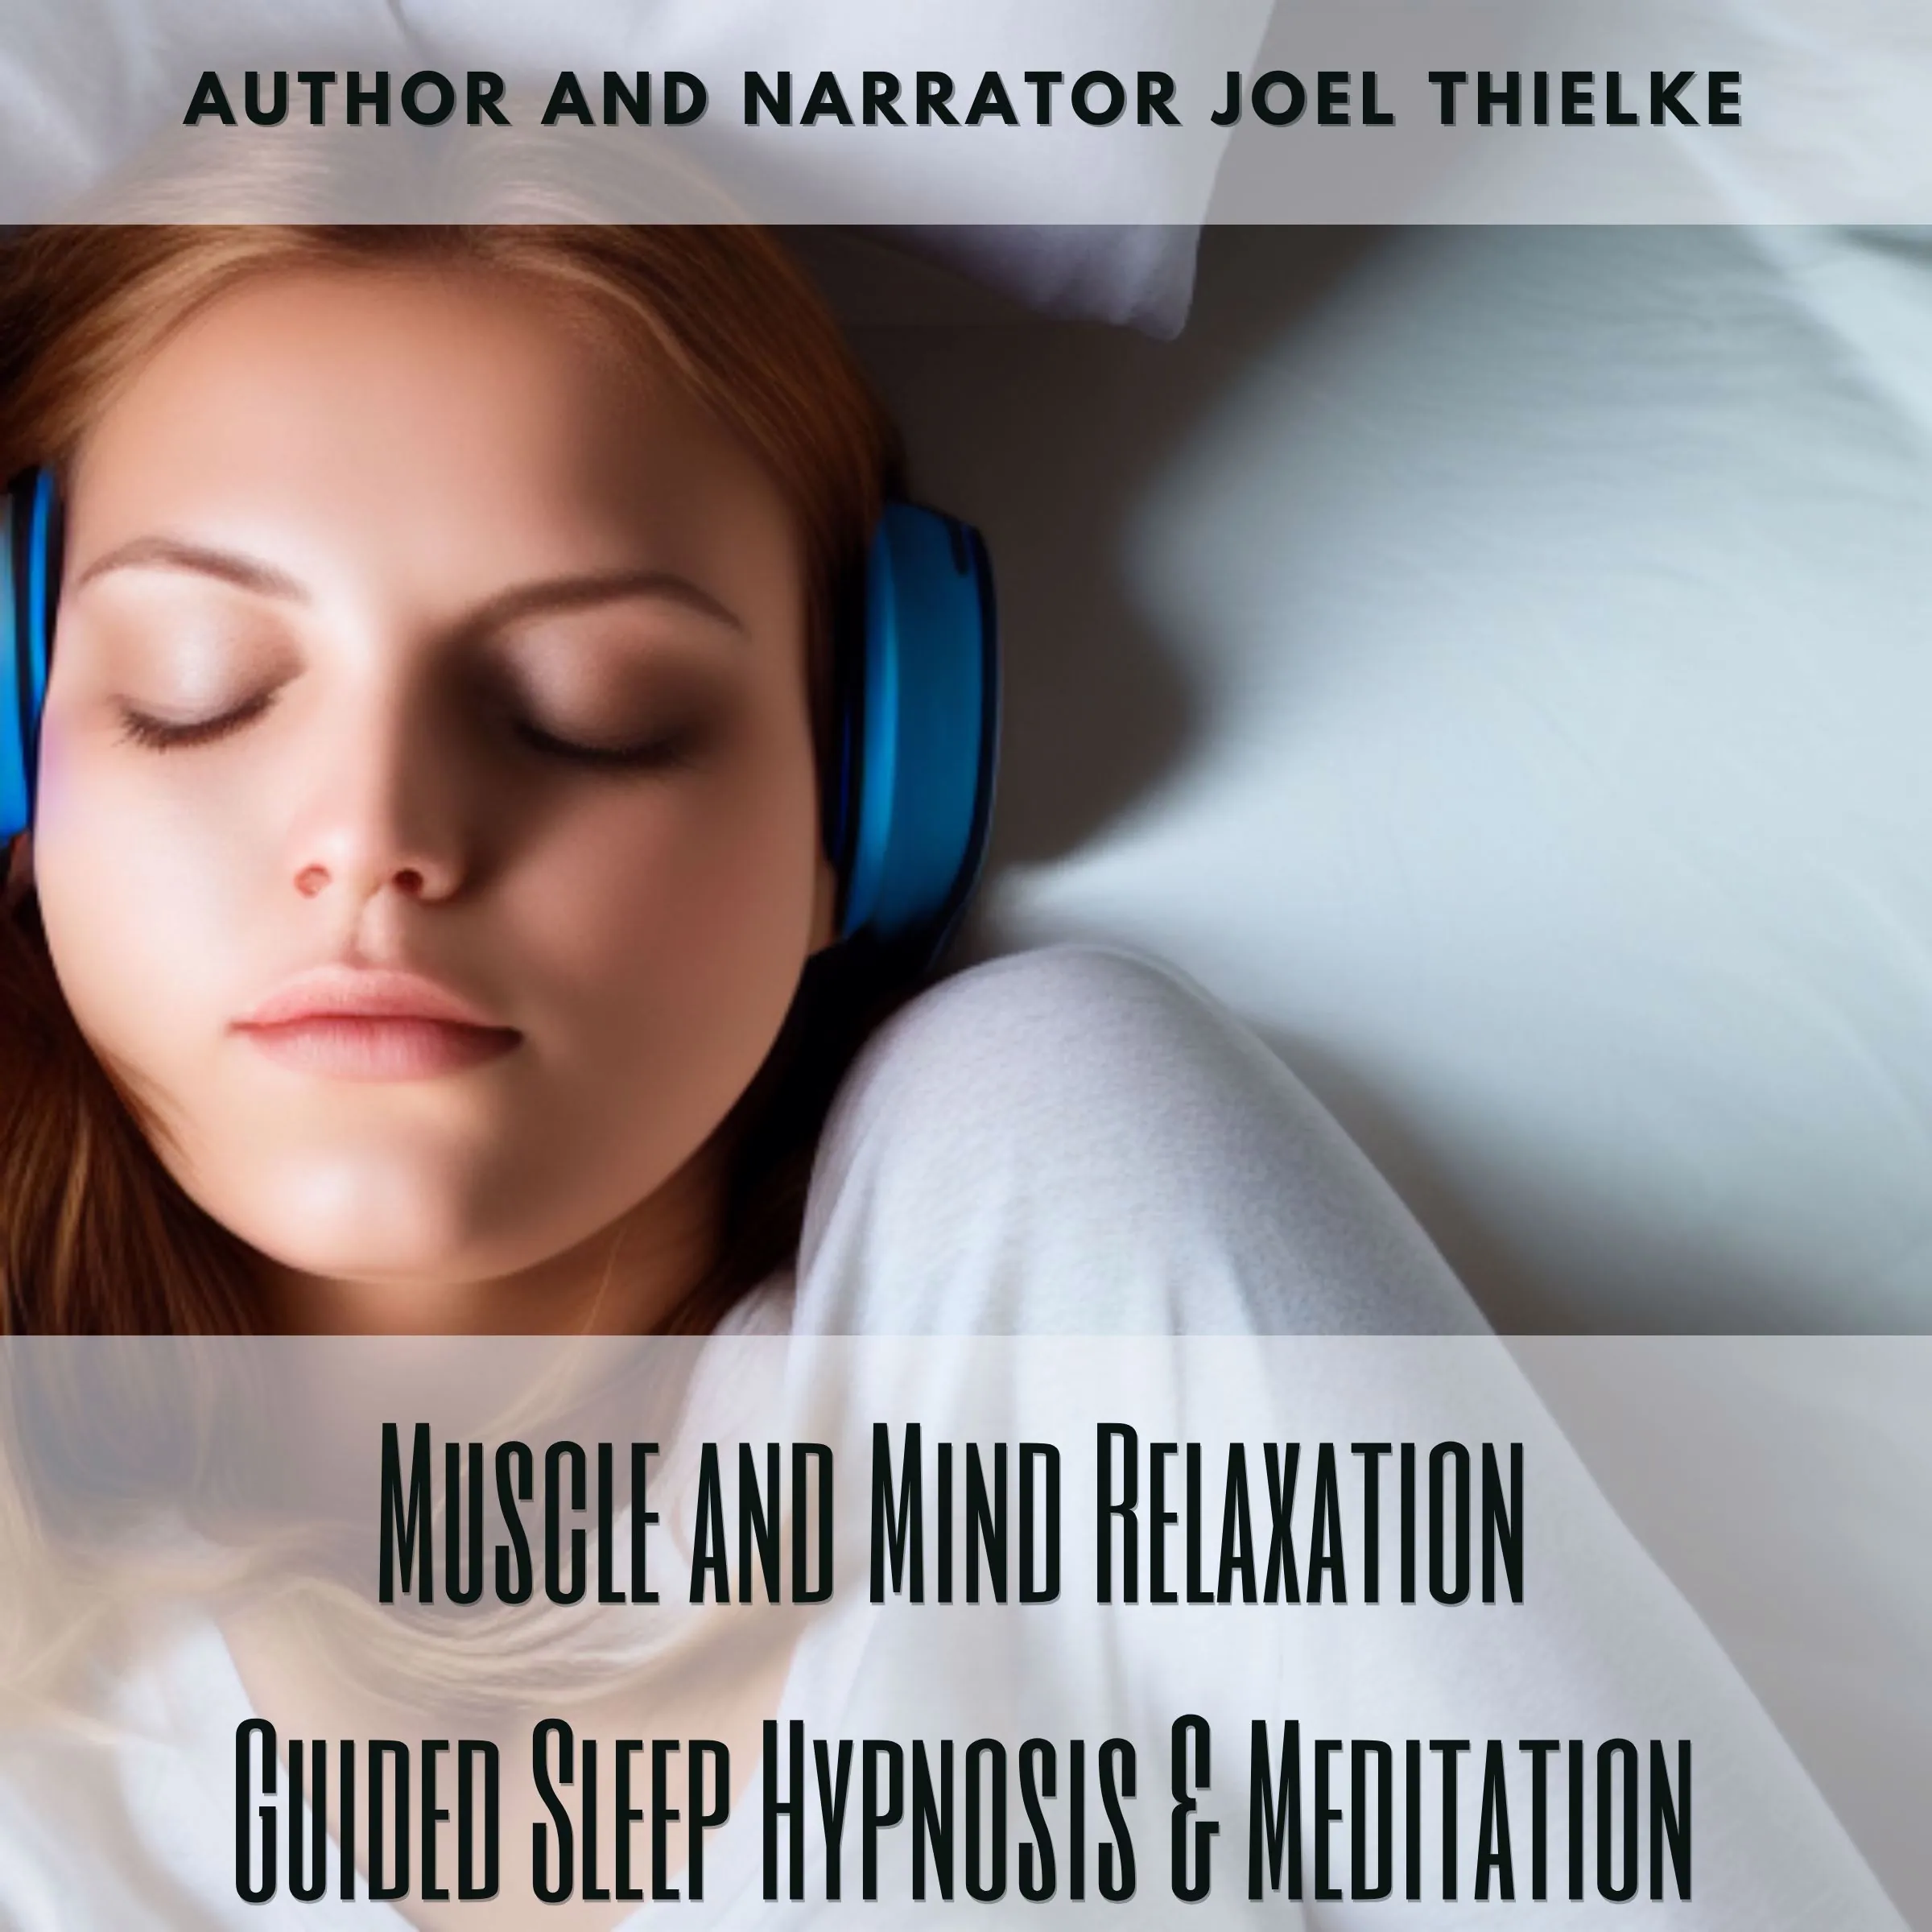 Muscle and Mind Relaxation by Joel Thielke Audiobook